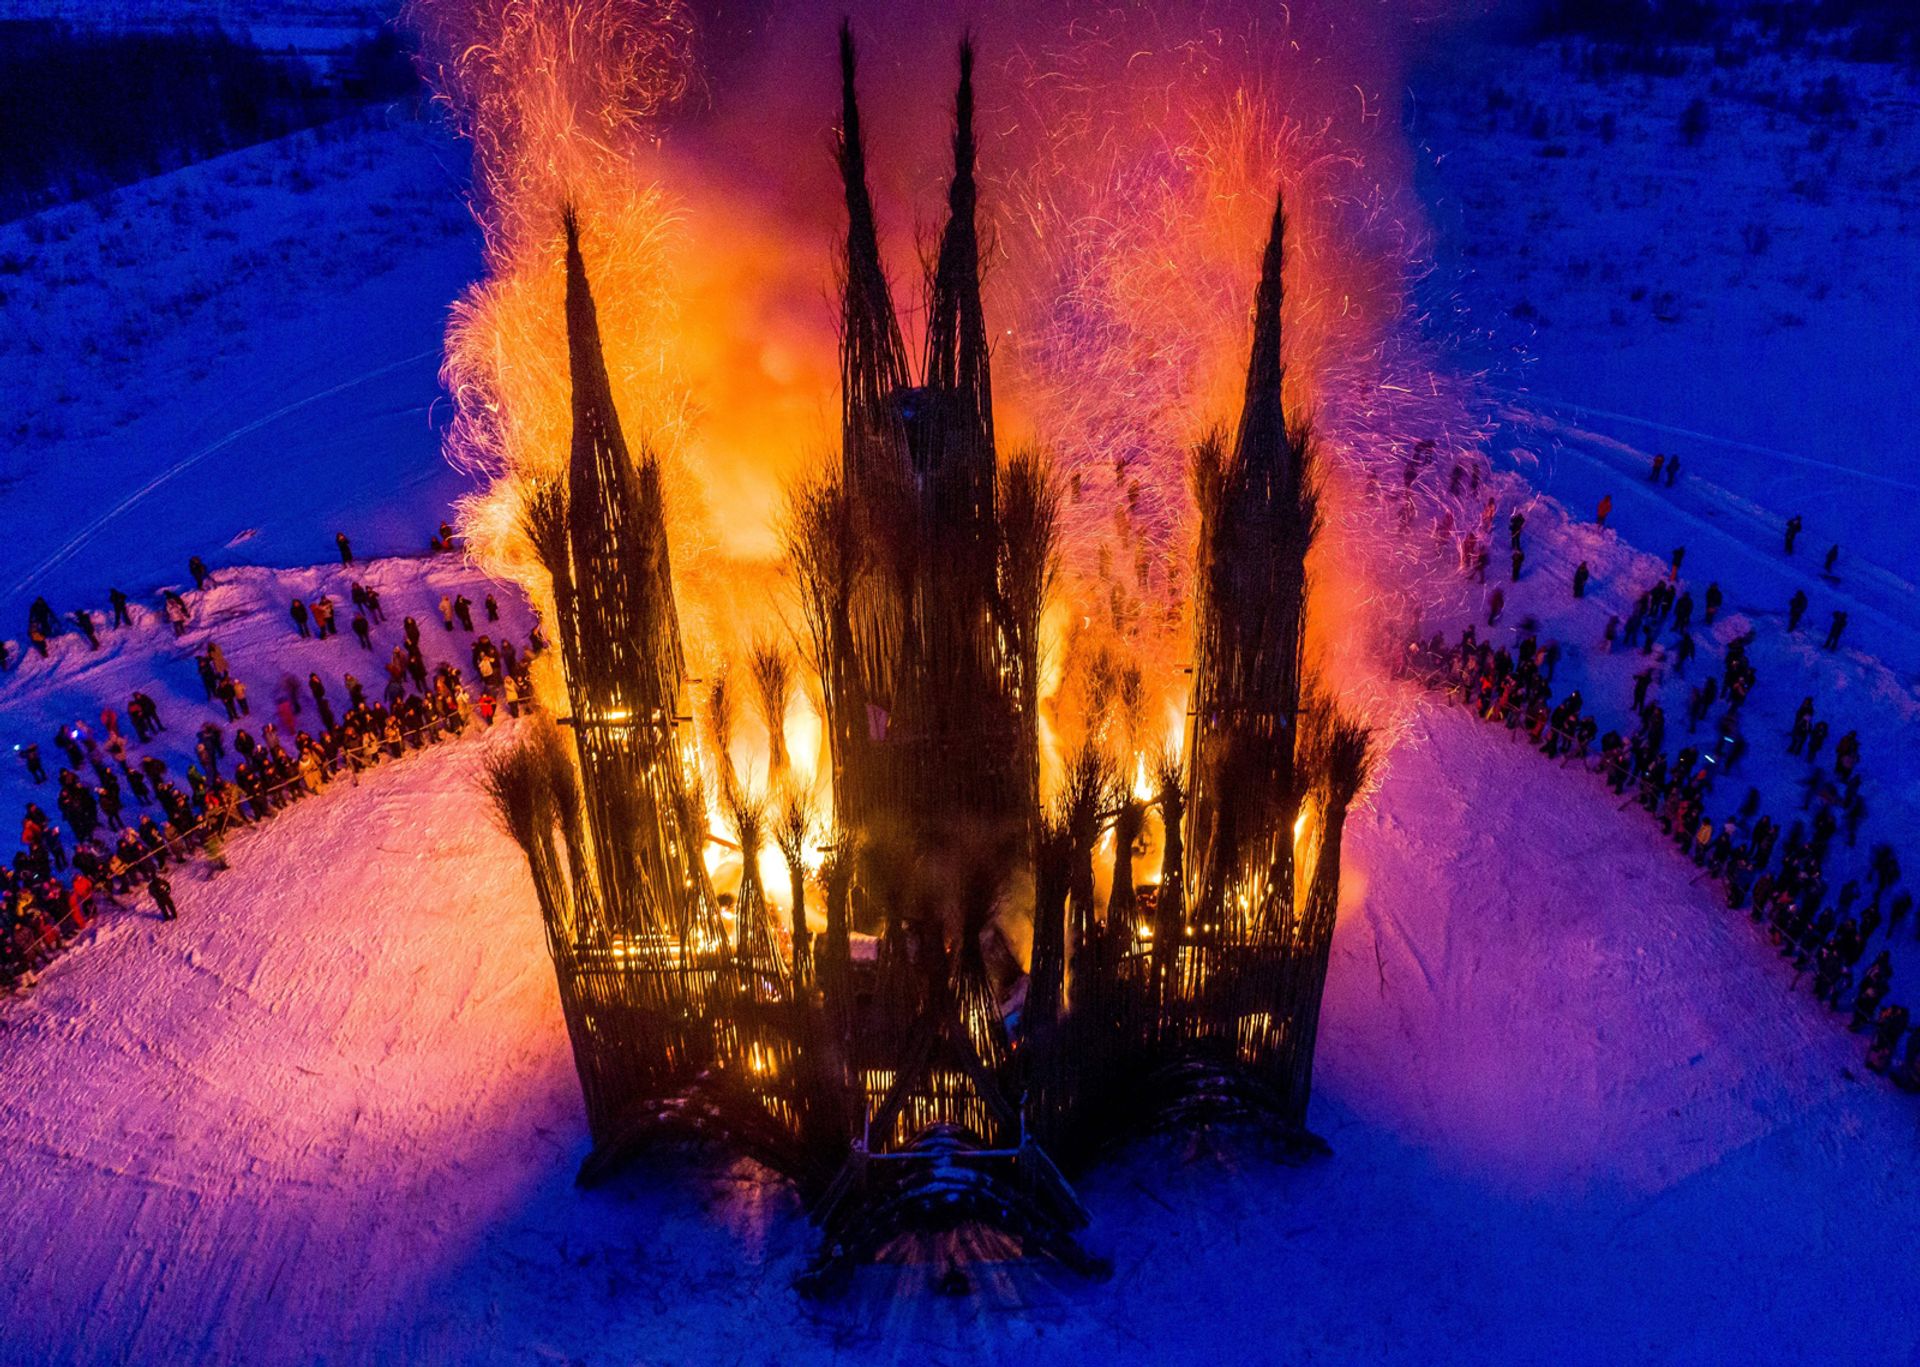 The controversial burning of the 30m Gothic-style structure built of twigs by the Russian artist Nikolay Polissky DMITRY SEREBRYAKOV/AFP/Getty Images